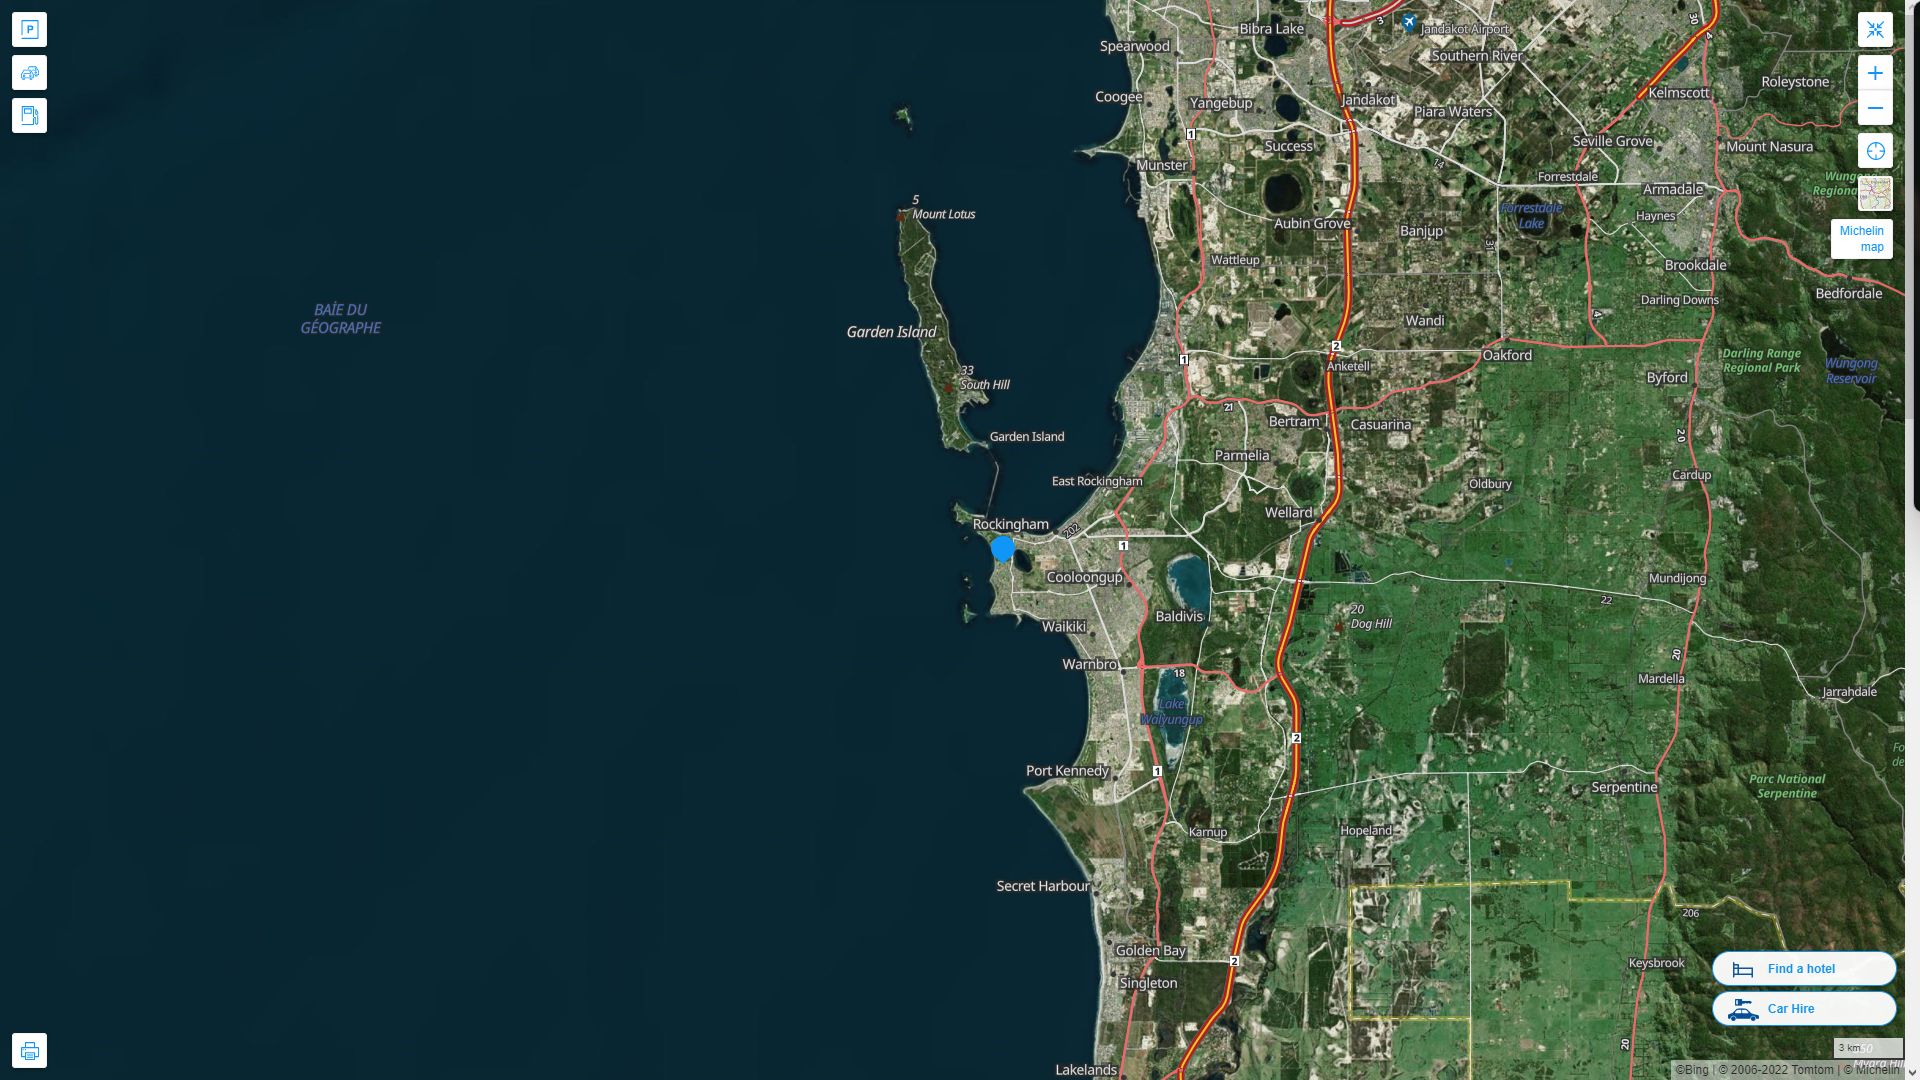 Rockingham Highway and Road Map with Satellite View